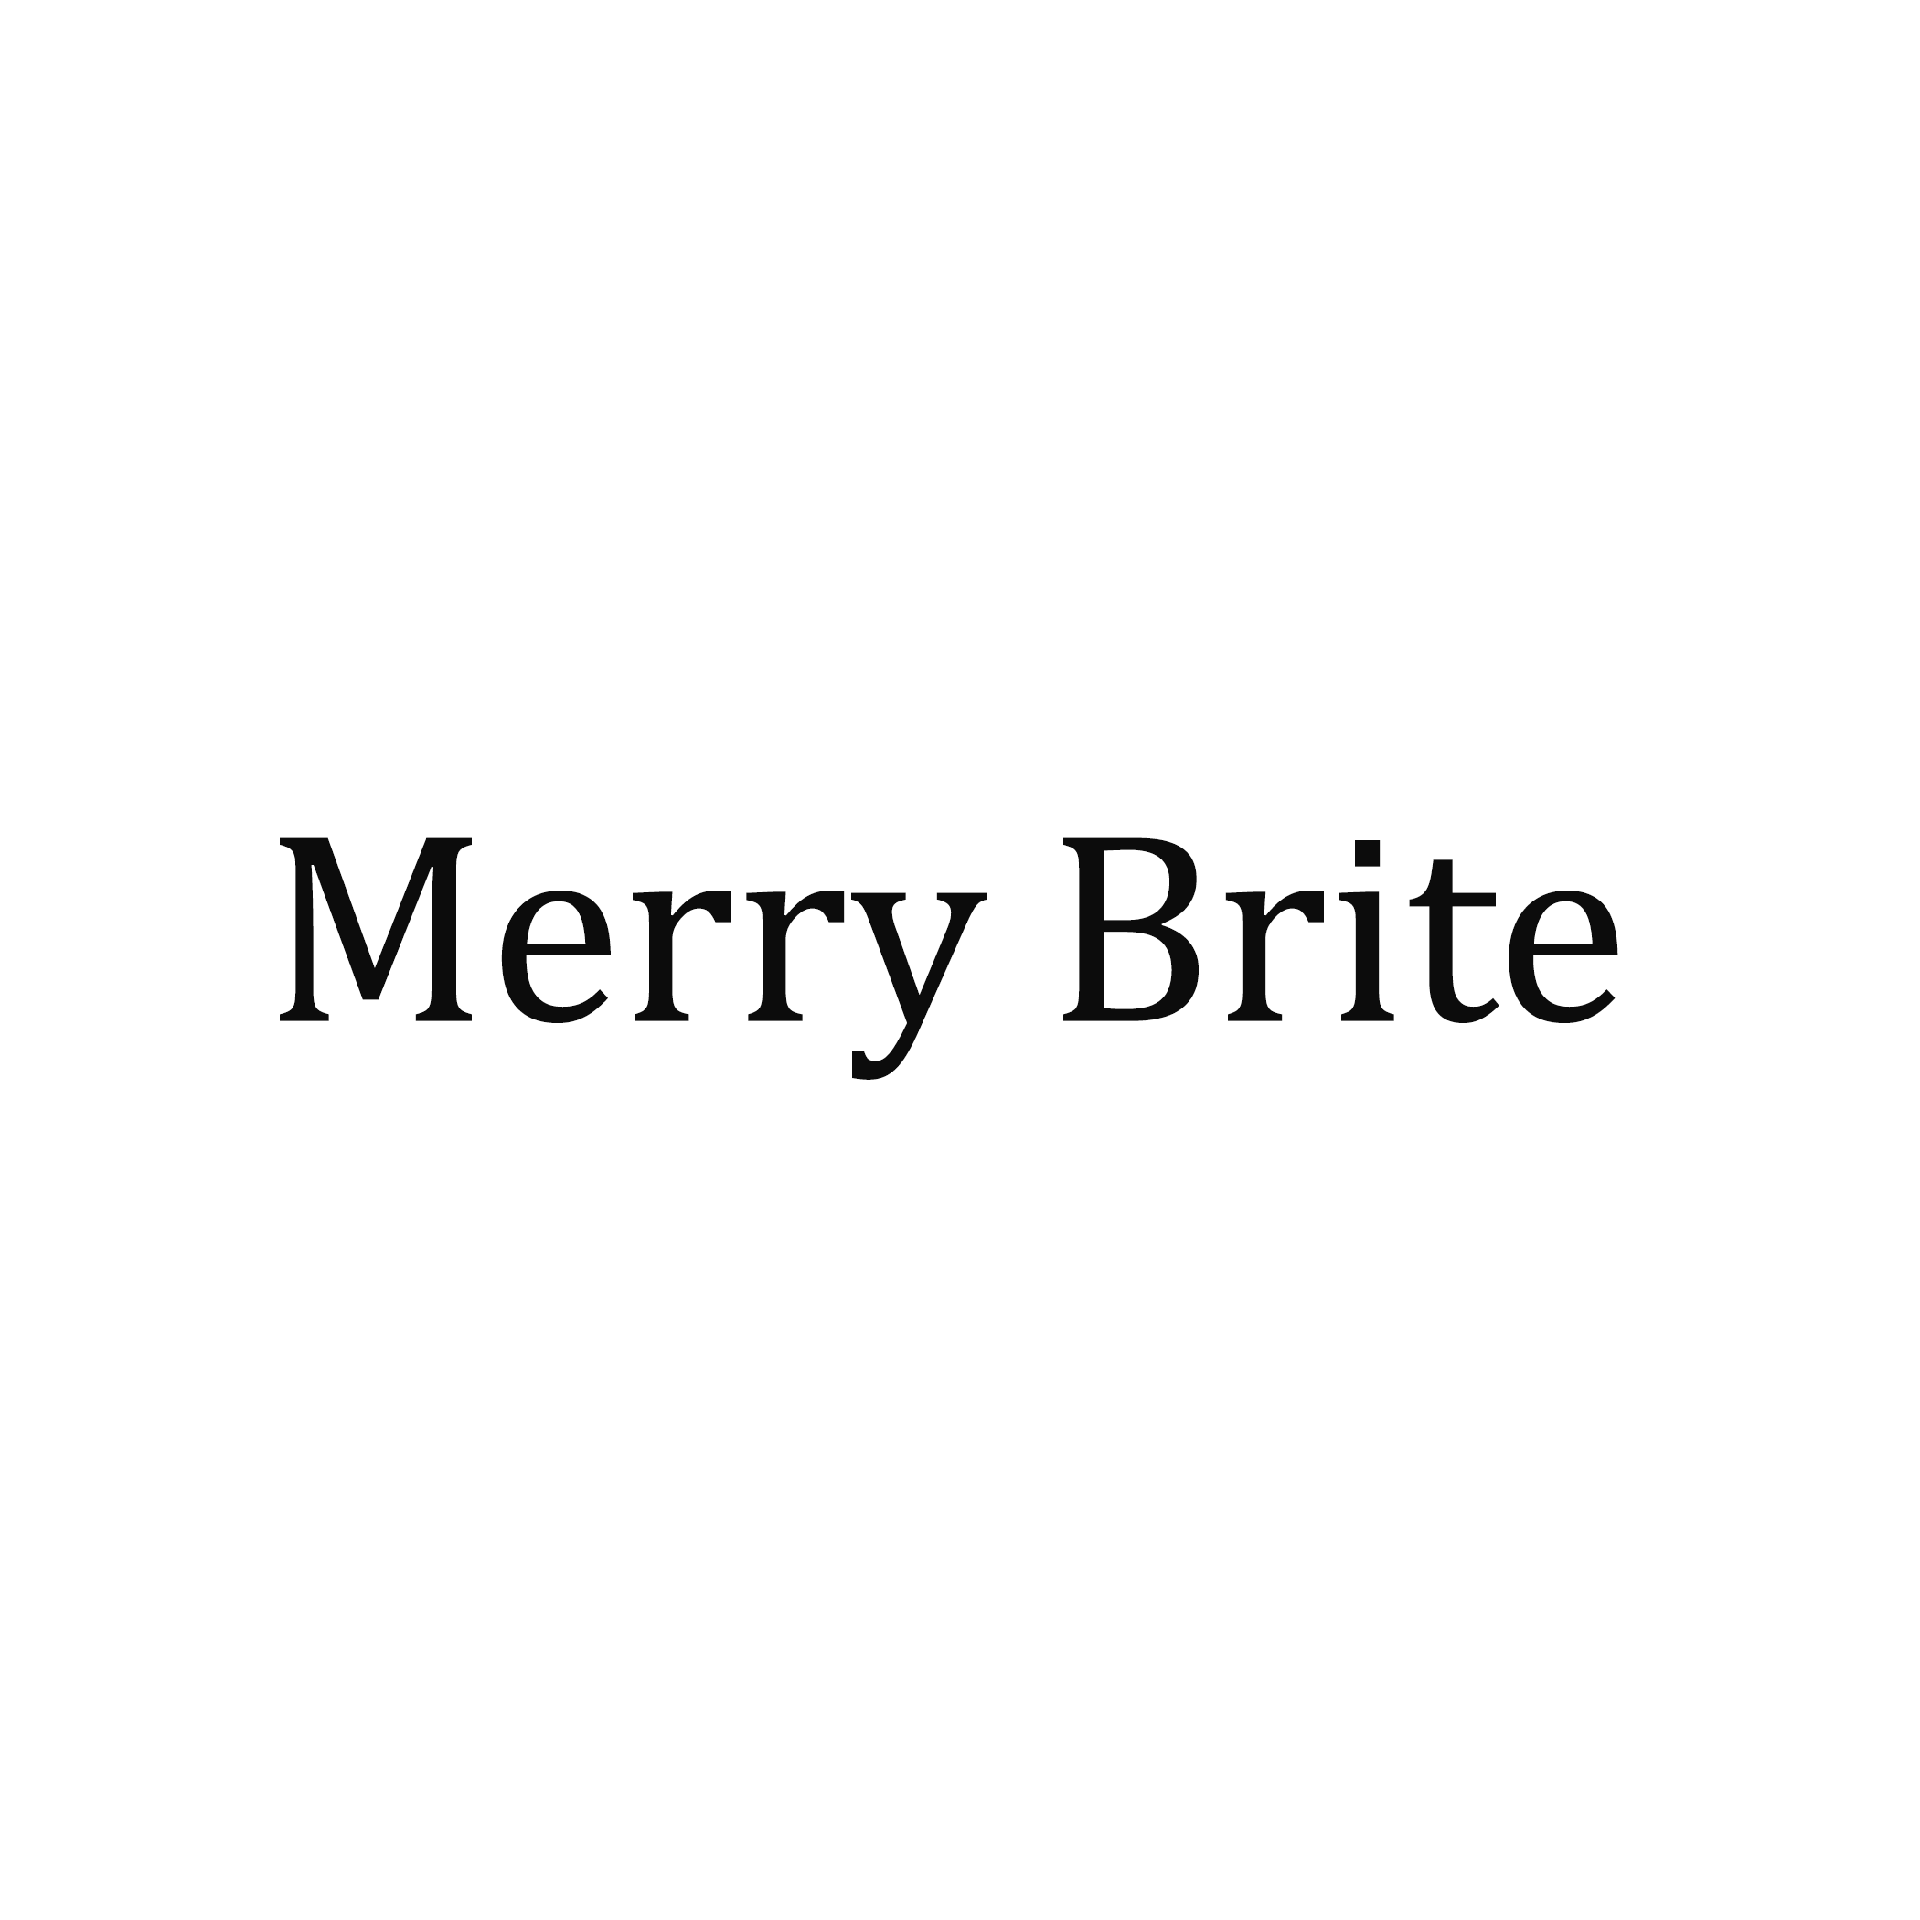 Product Brand: Merry Brite